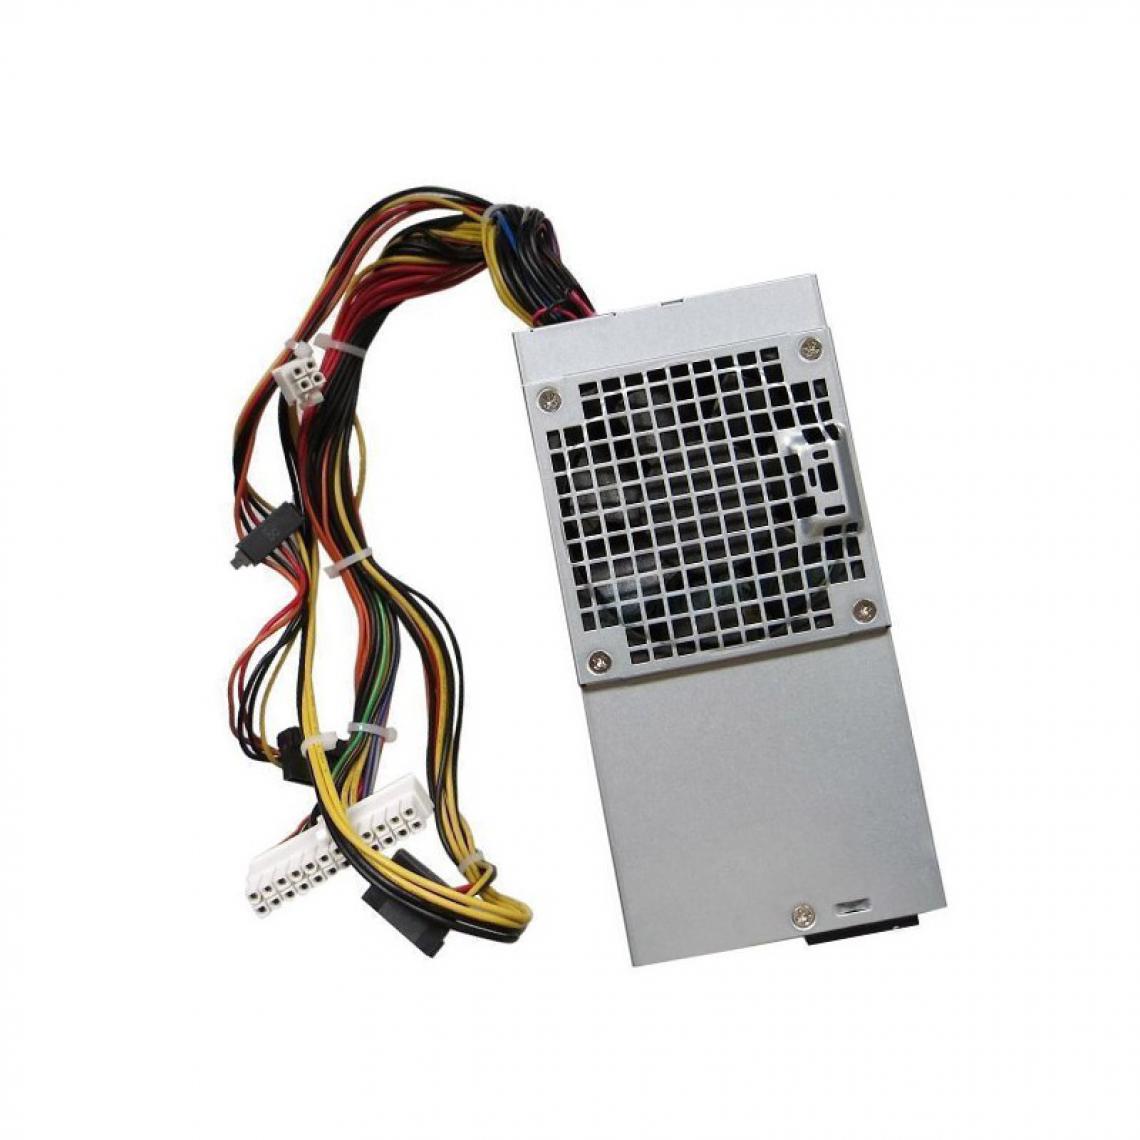 Dell - Alimentation DELL F250AD-00 0MPX3V D-0250ADU00-201 390 790 990 7010 9010 DT 250W - Alimentation modulaire